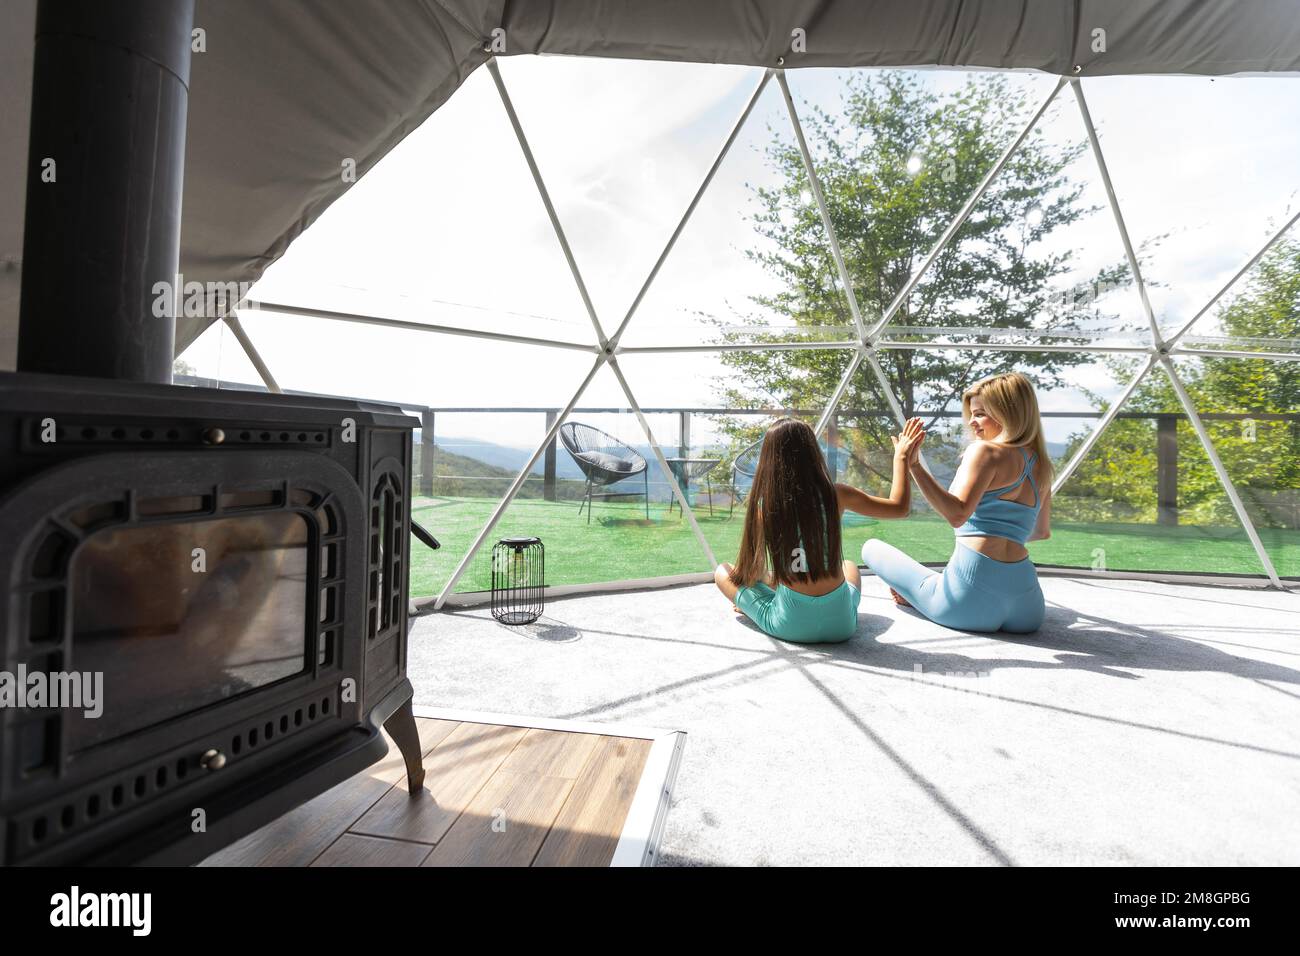 Woman Doing Yoga in Glamping Dome Tent Stock Photo - Image of